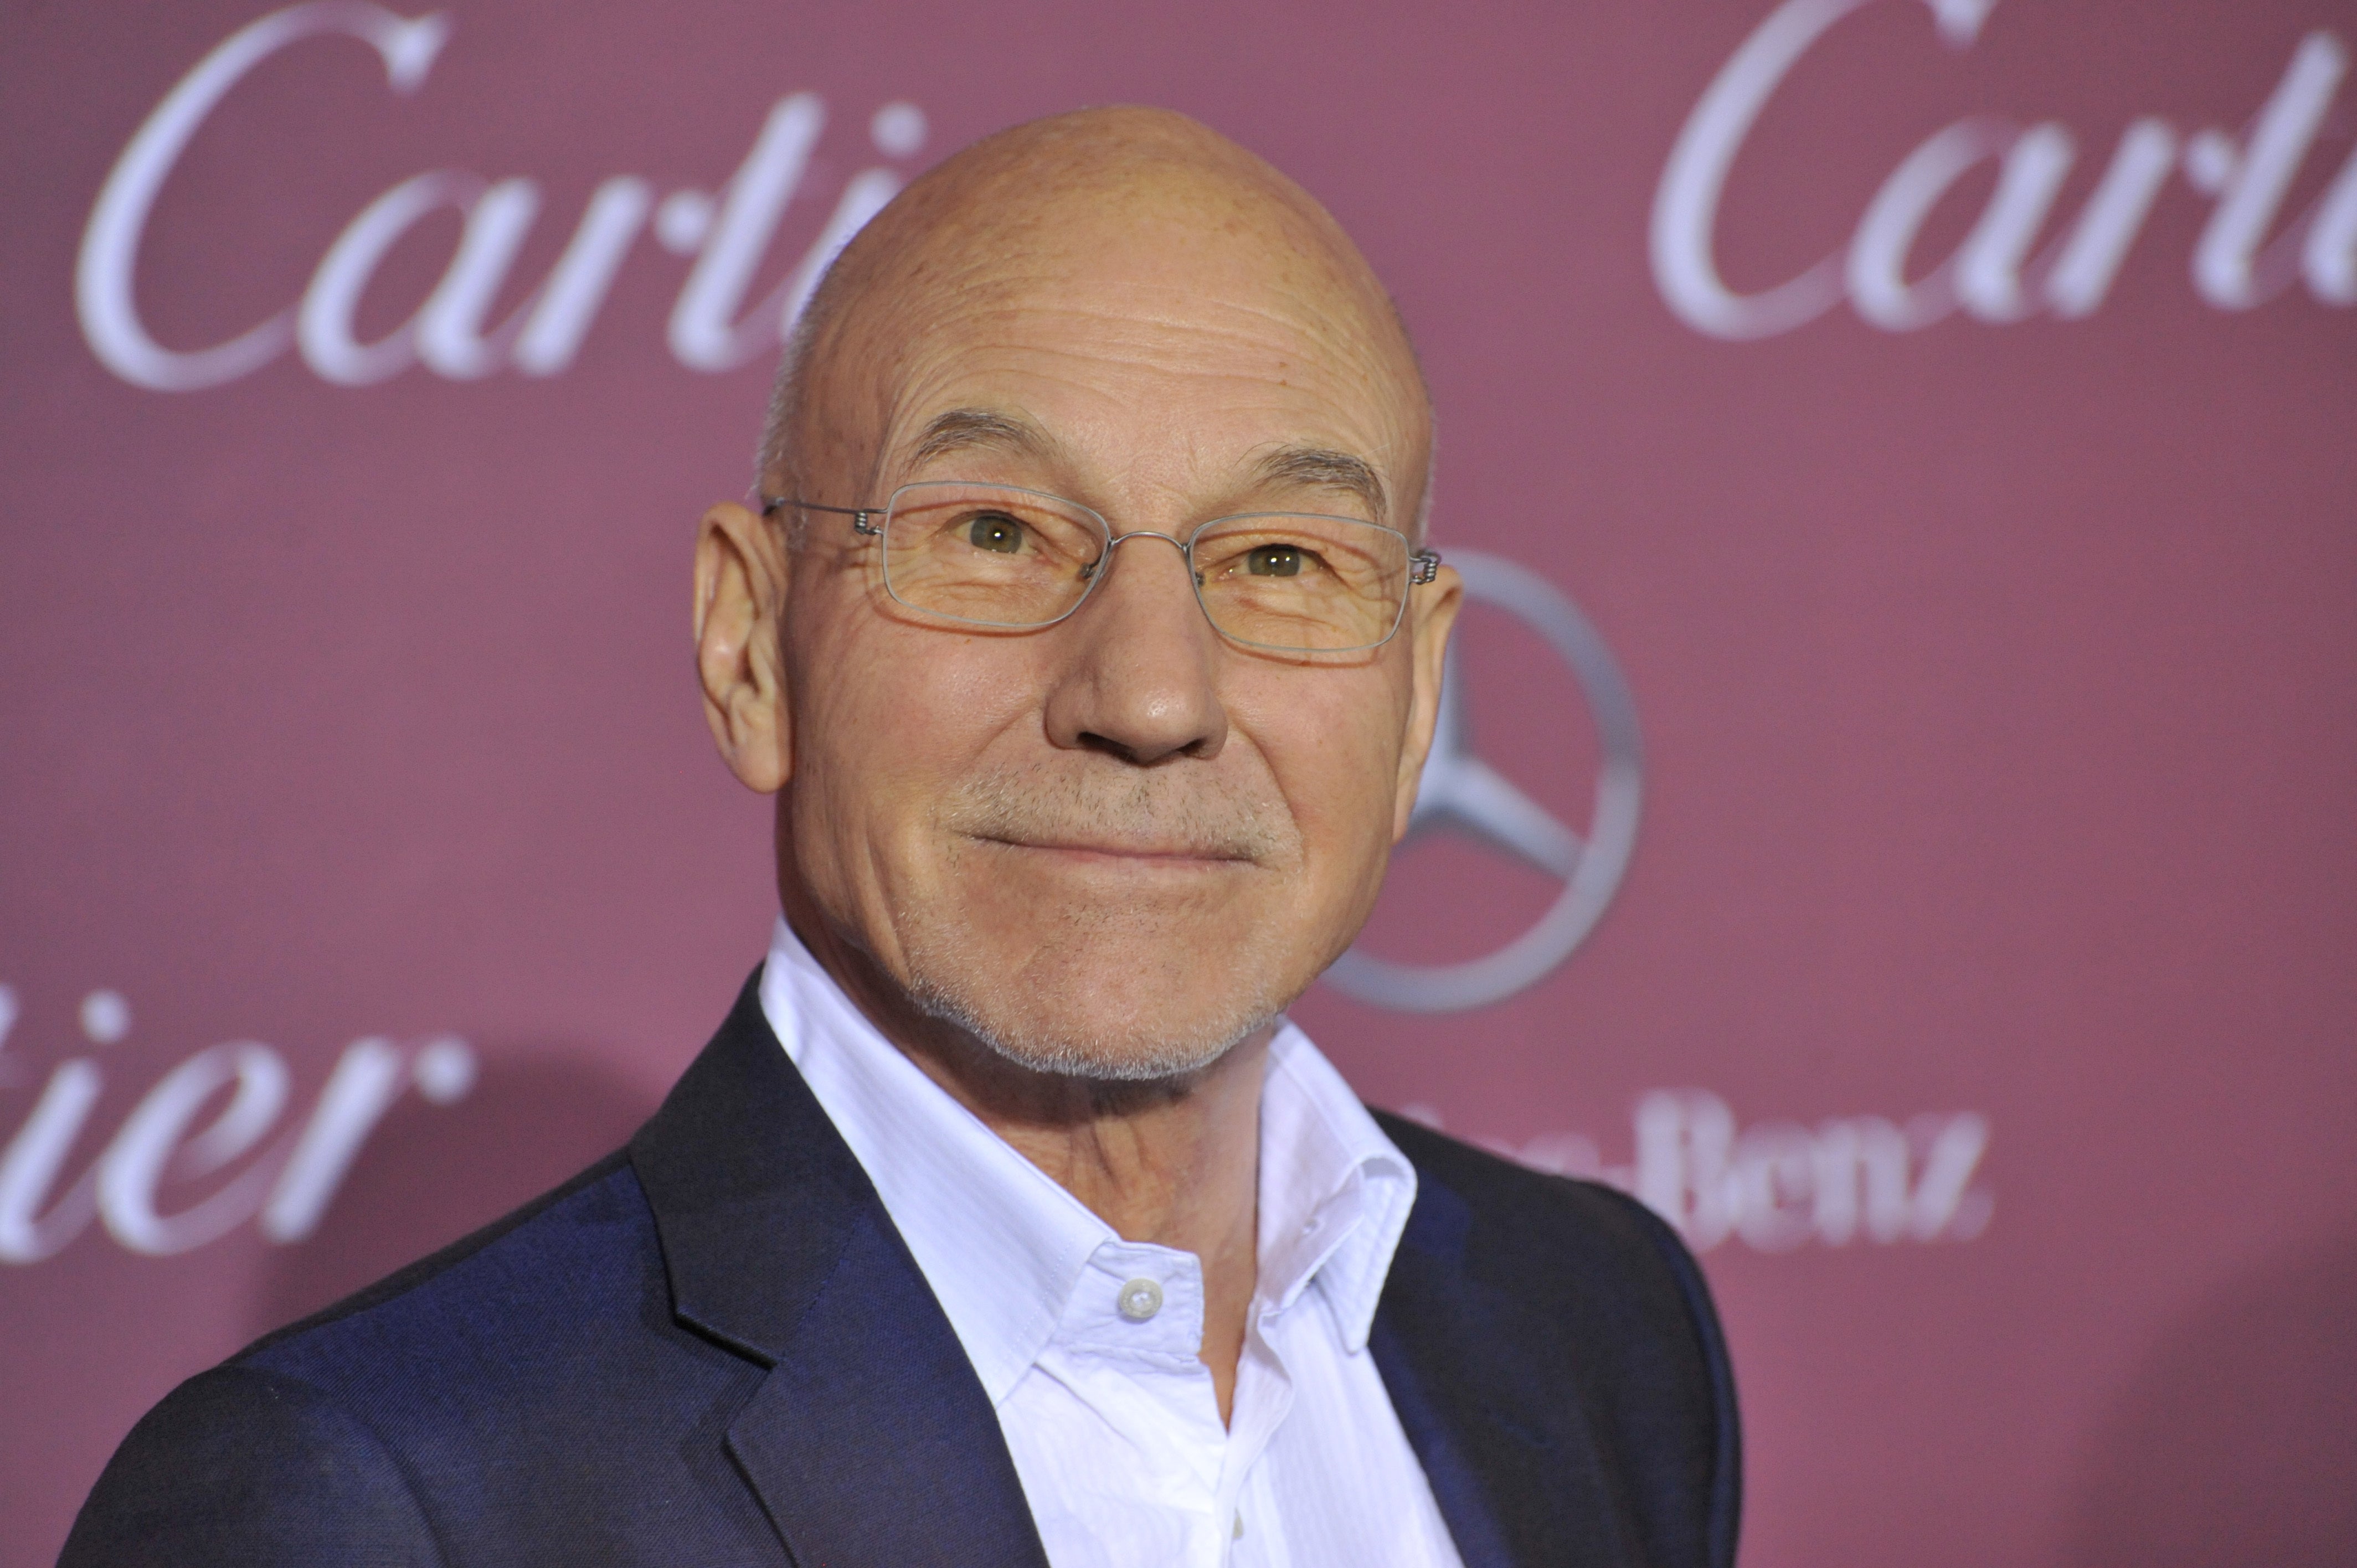 Patrick Stewart, a celebrity who loves cannabis flower, smiles at the camera and wears glasses and a gray suit.